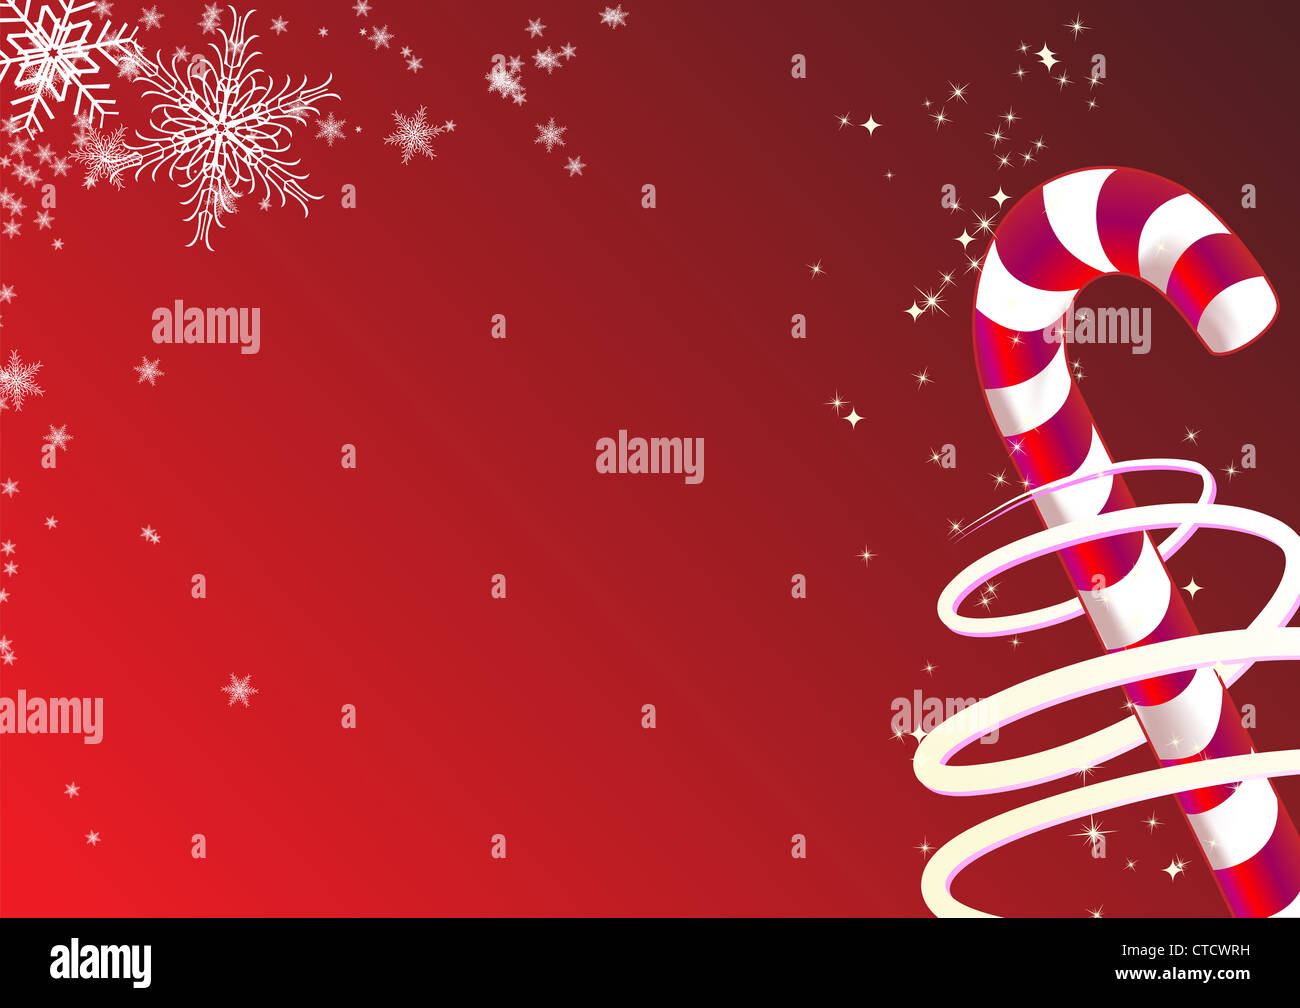 Vector illustration of christmas background. Includes candy and snowflakes. Stock Photo